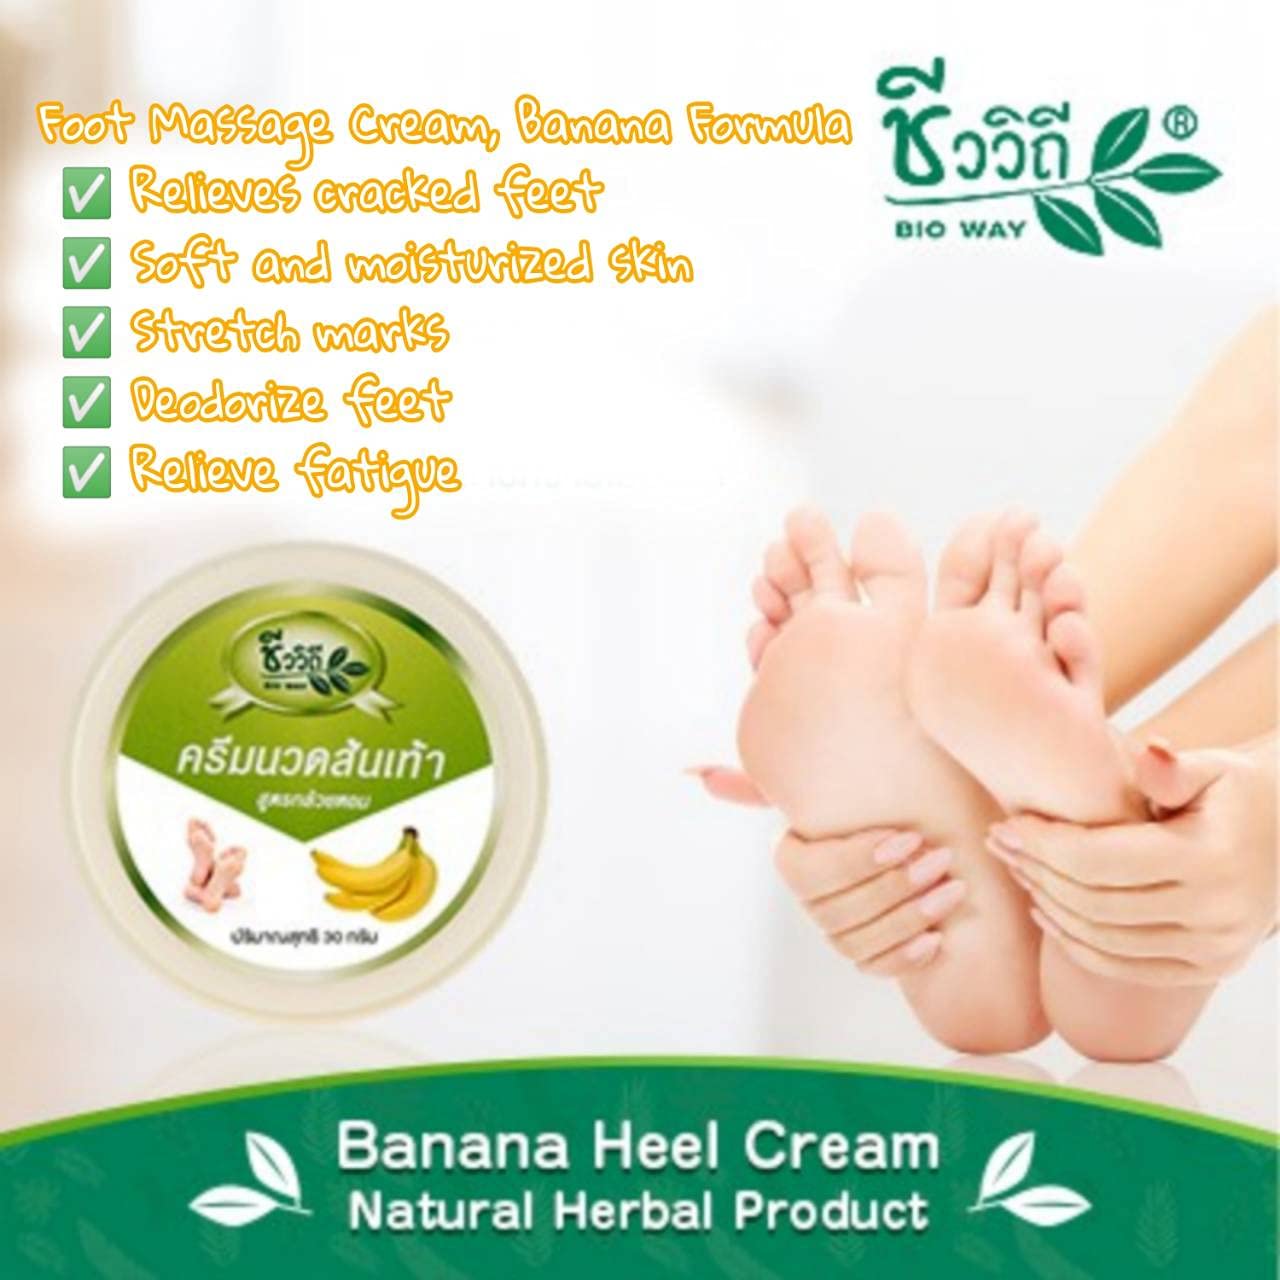 Sense Aroma Foot cracking cream Cracked heel massage cream, Banana formula, 30 g. 1pcs.For smooth, soft and moist heel skin Foot spa Deodorize feet as well (A natural product with a relaxing scent)